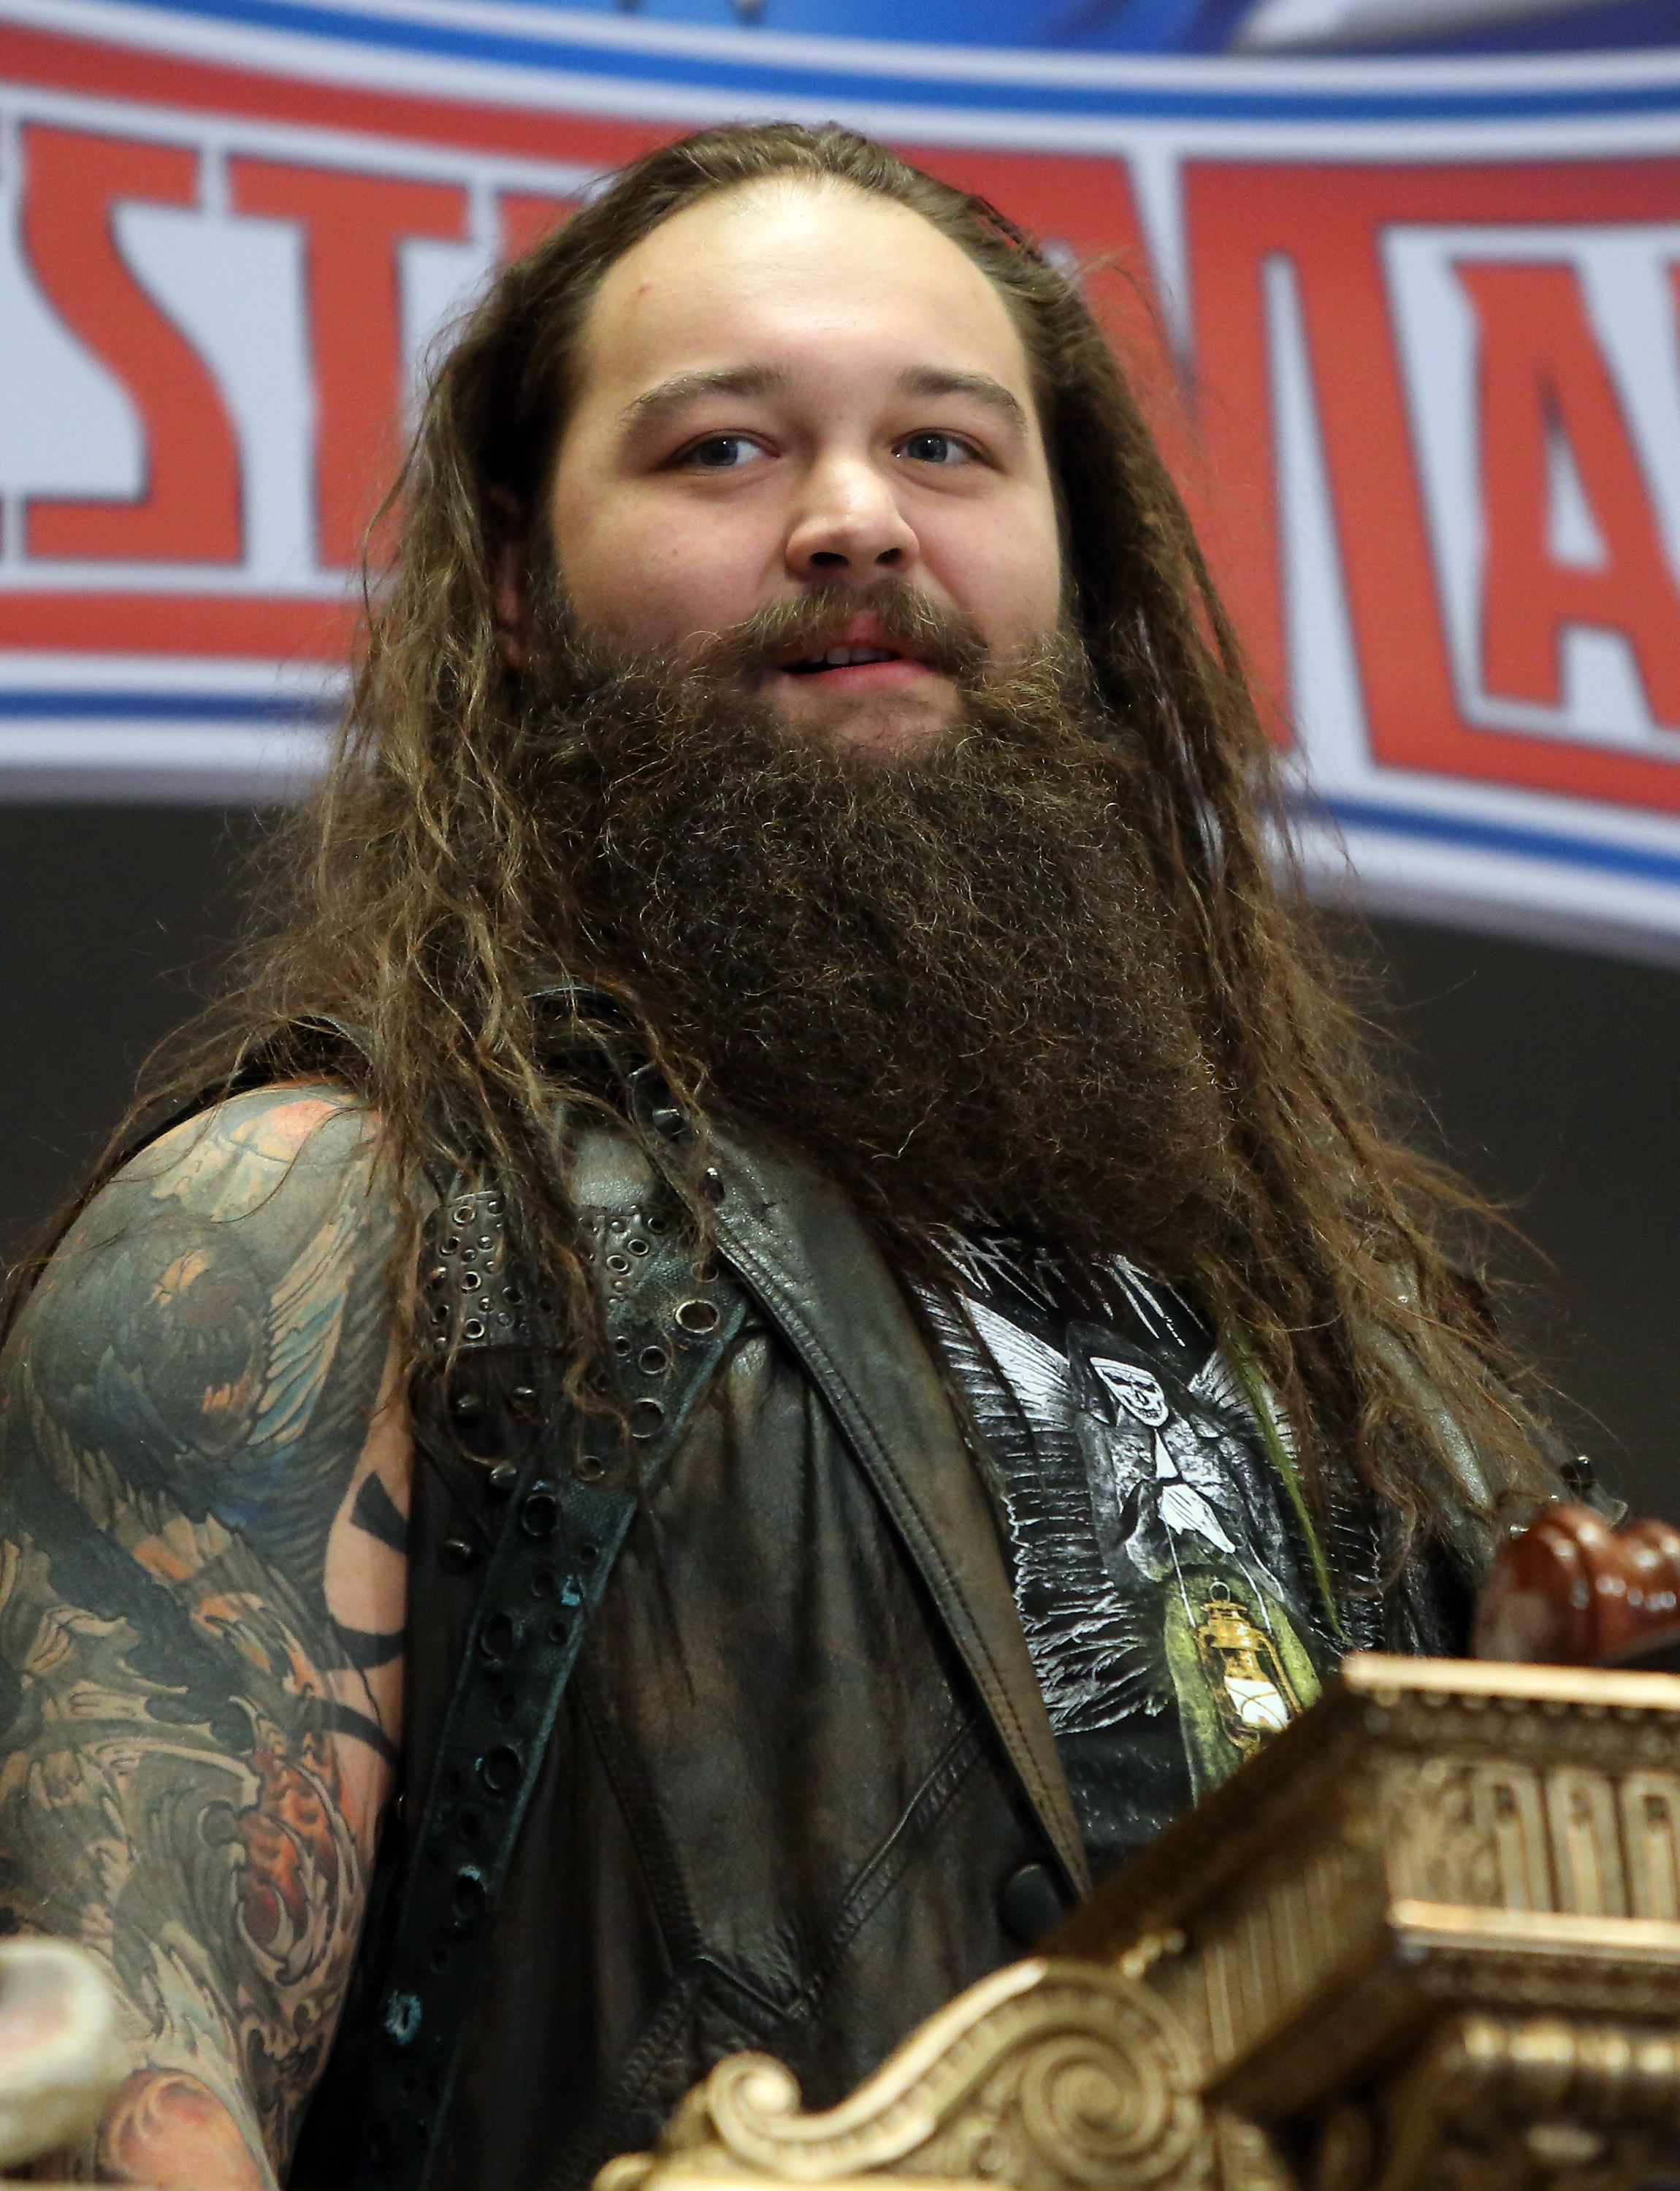 Bray Wyatt attends WWE WrestleMania Stars Ring The NYSE Opening Bell at New York Stock Exchange on March 29, 2016, in New York City. | Source: Getty Images